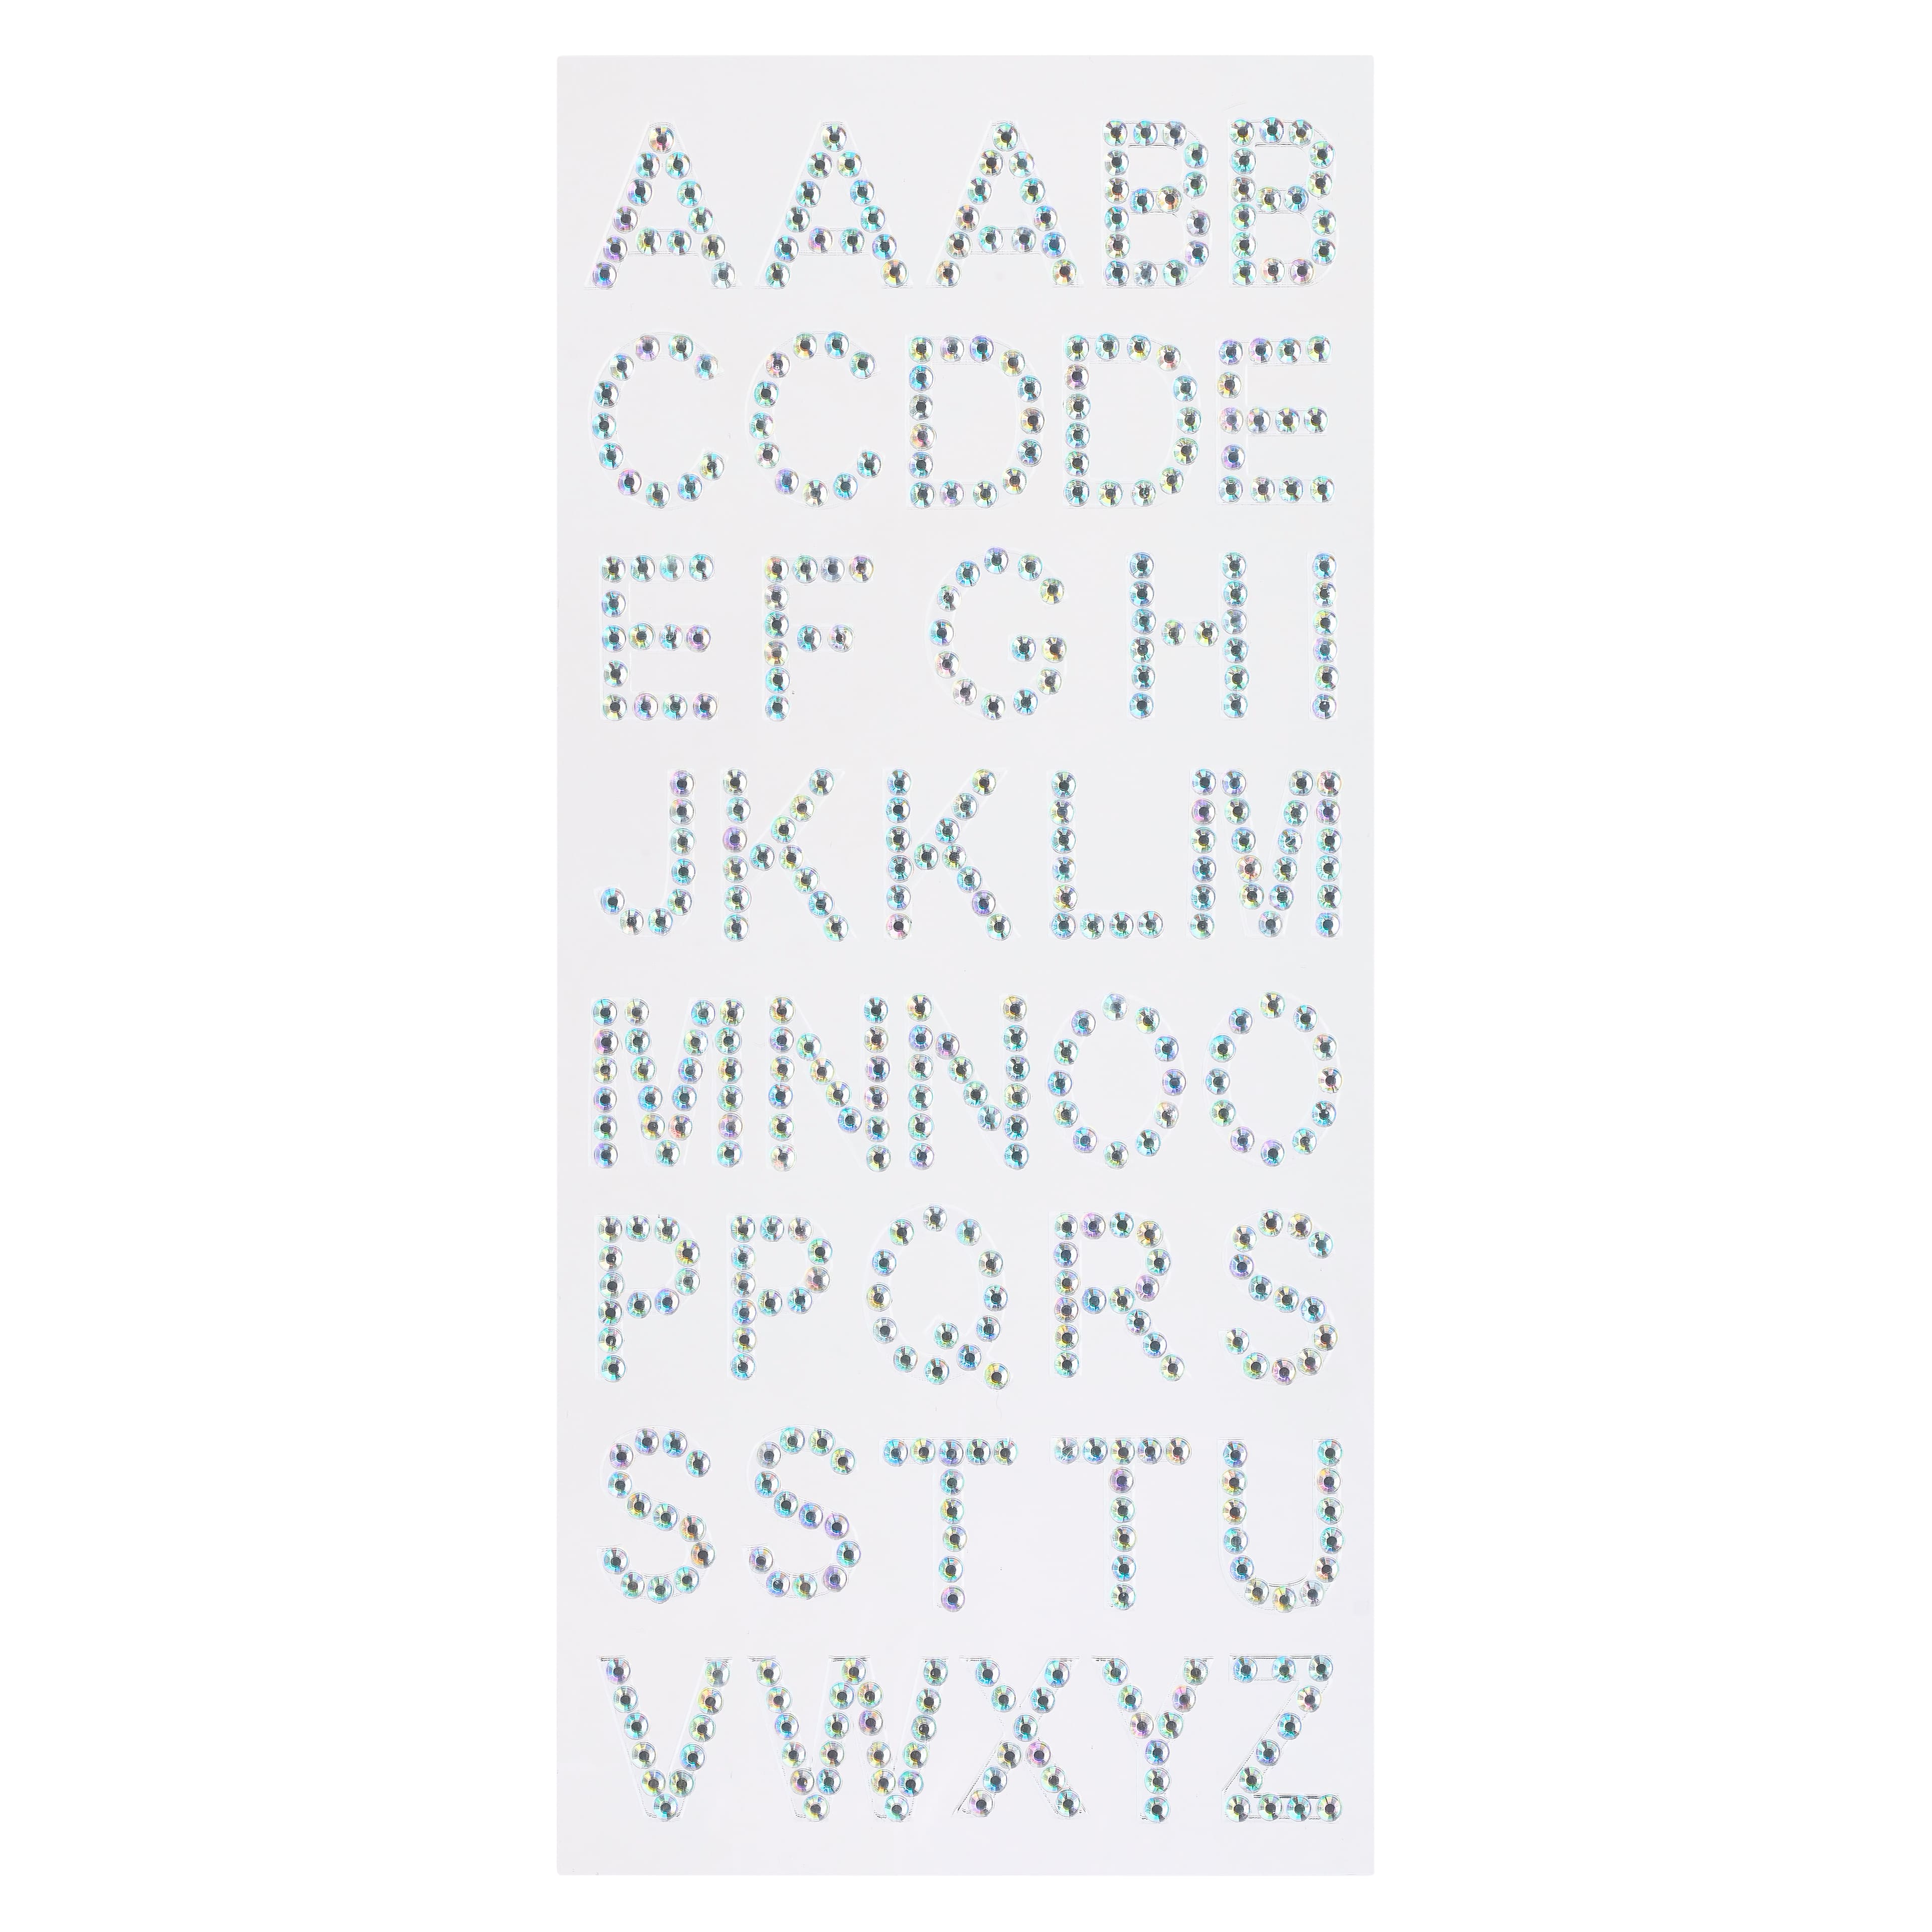 12 Packs: 40 ct. (480 total) Iridescent Rhinestone Alphabet Stickers by Recollections&#x2122;